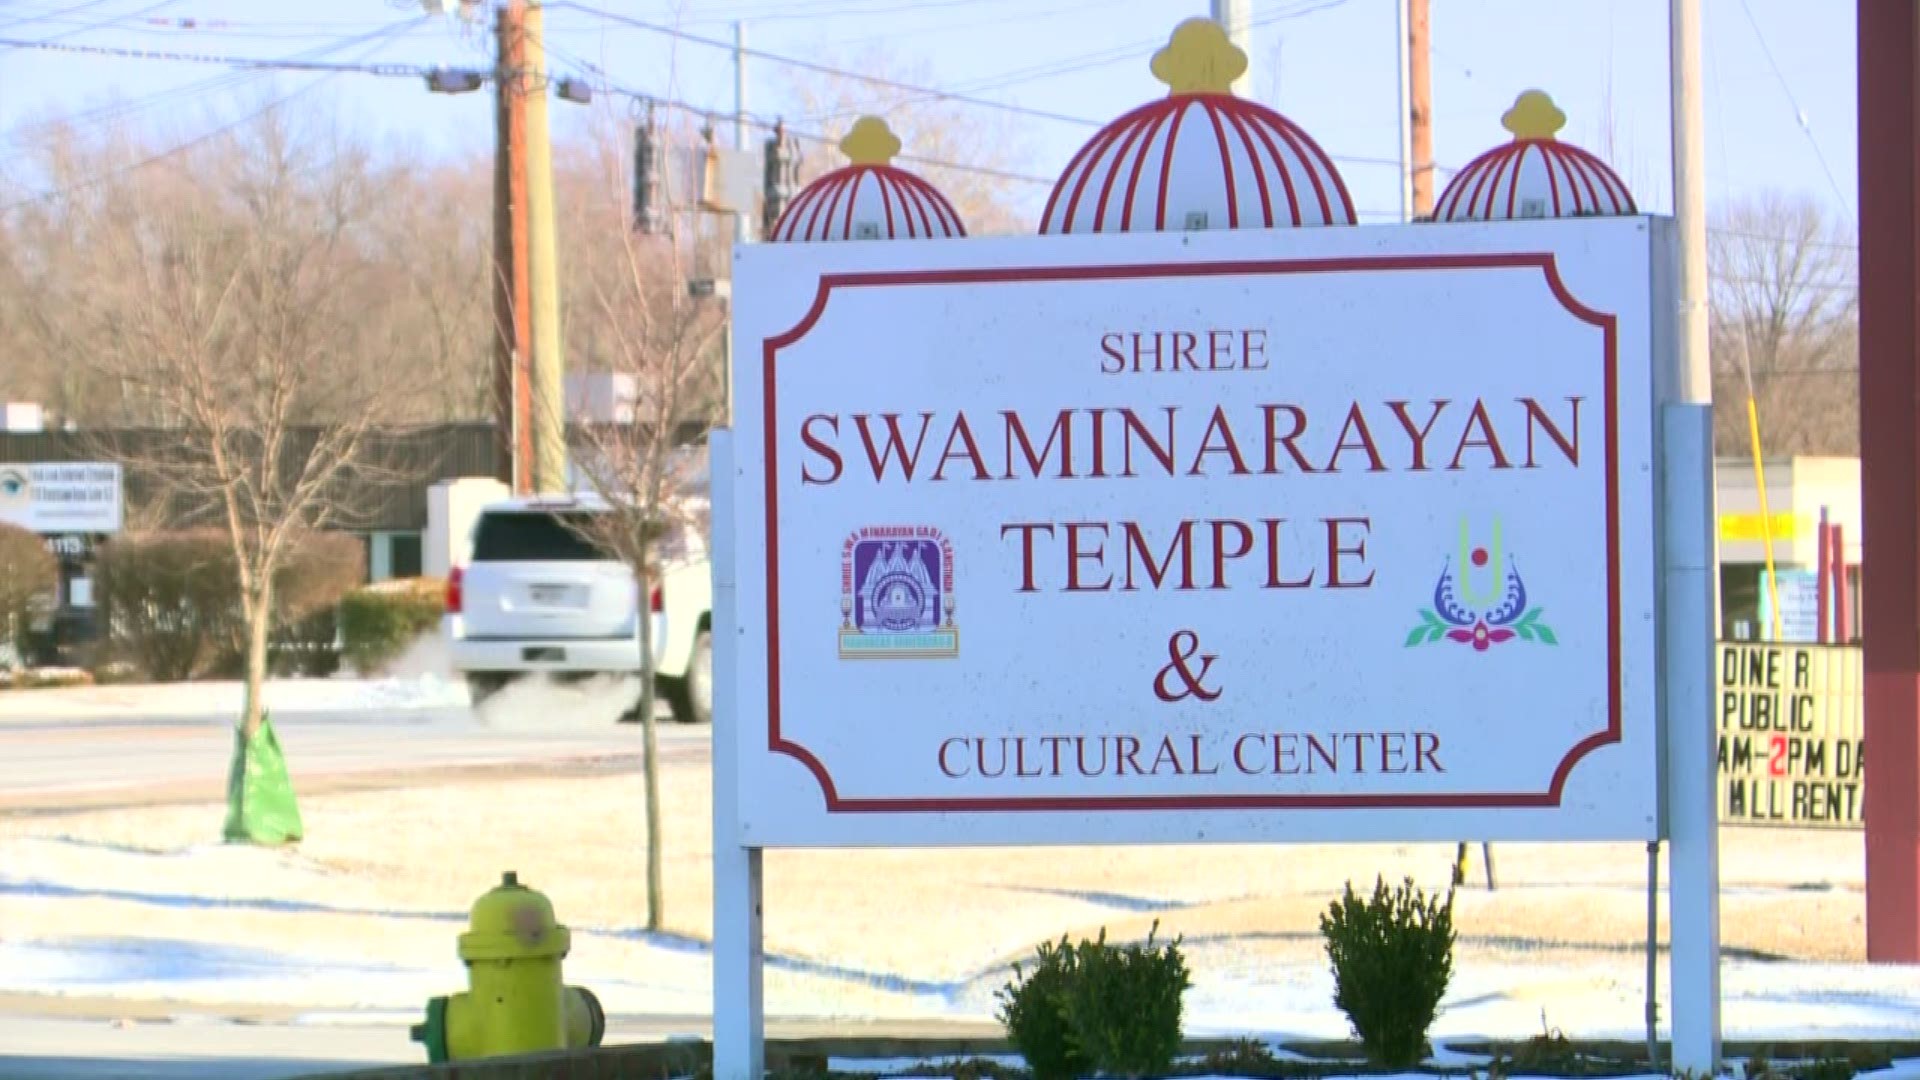 A 17-year-old was arrested for vandalizing a Hindu temple in Louisville hours after police received a tip from the public.